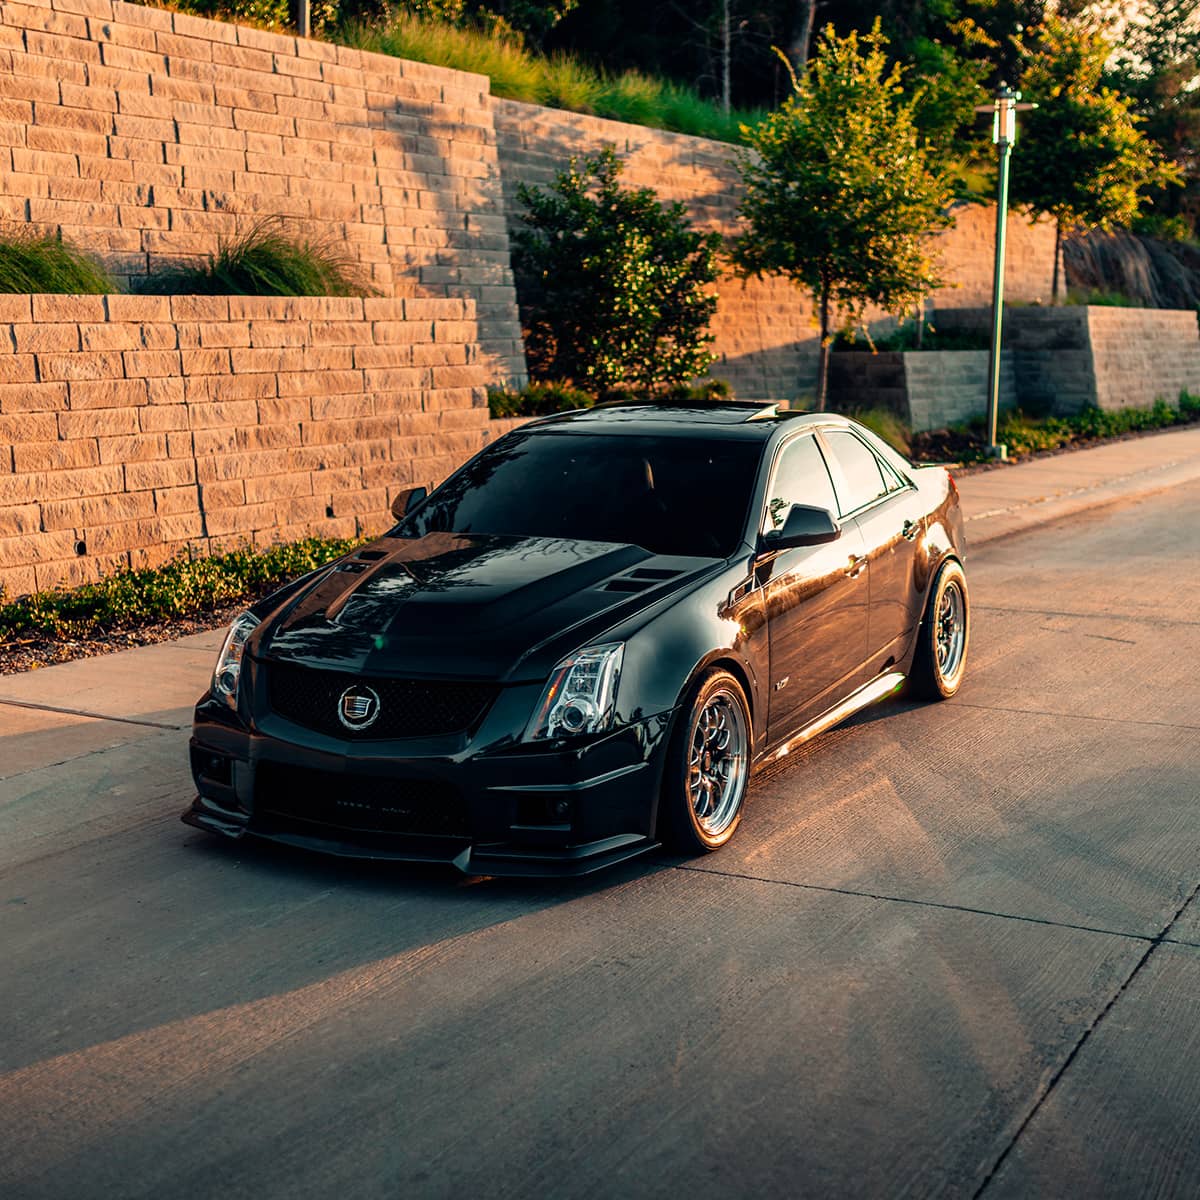 Blacked out 2nd Gen Cadillac CTS-V Sedan With Carbon Fiber Add-ons